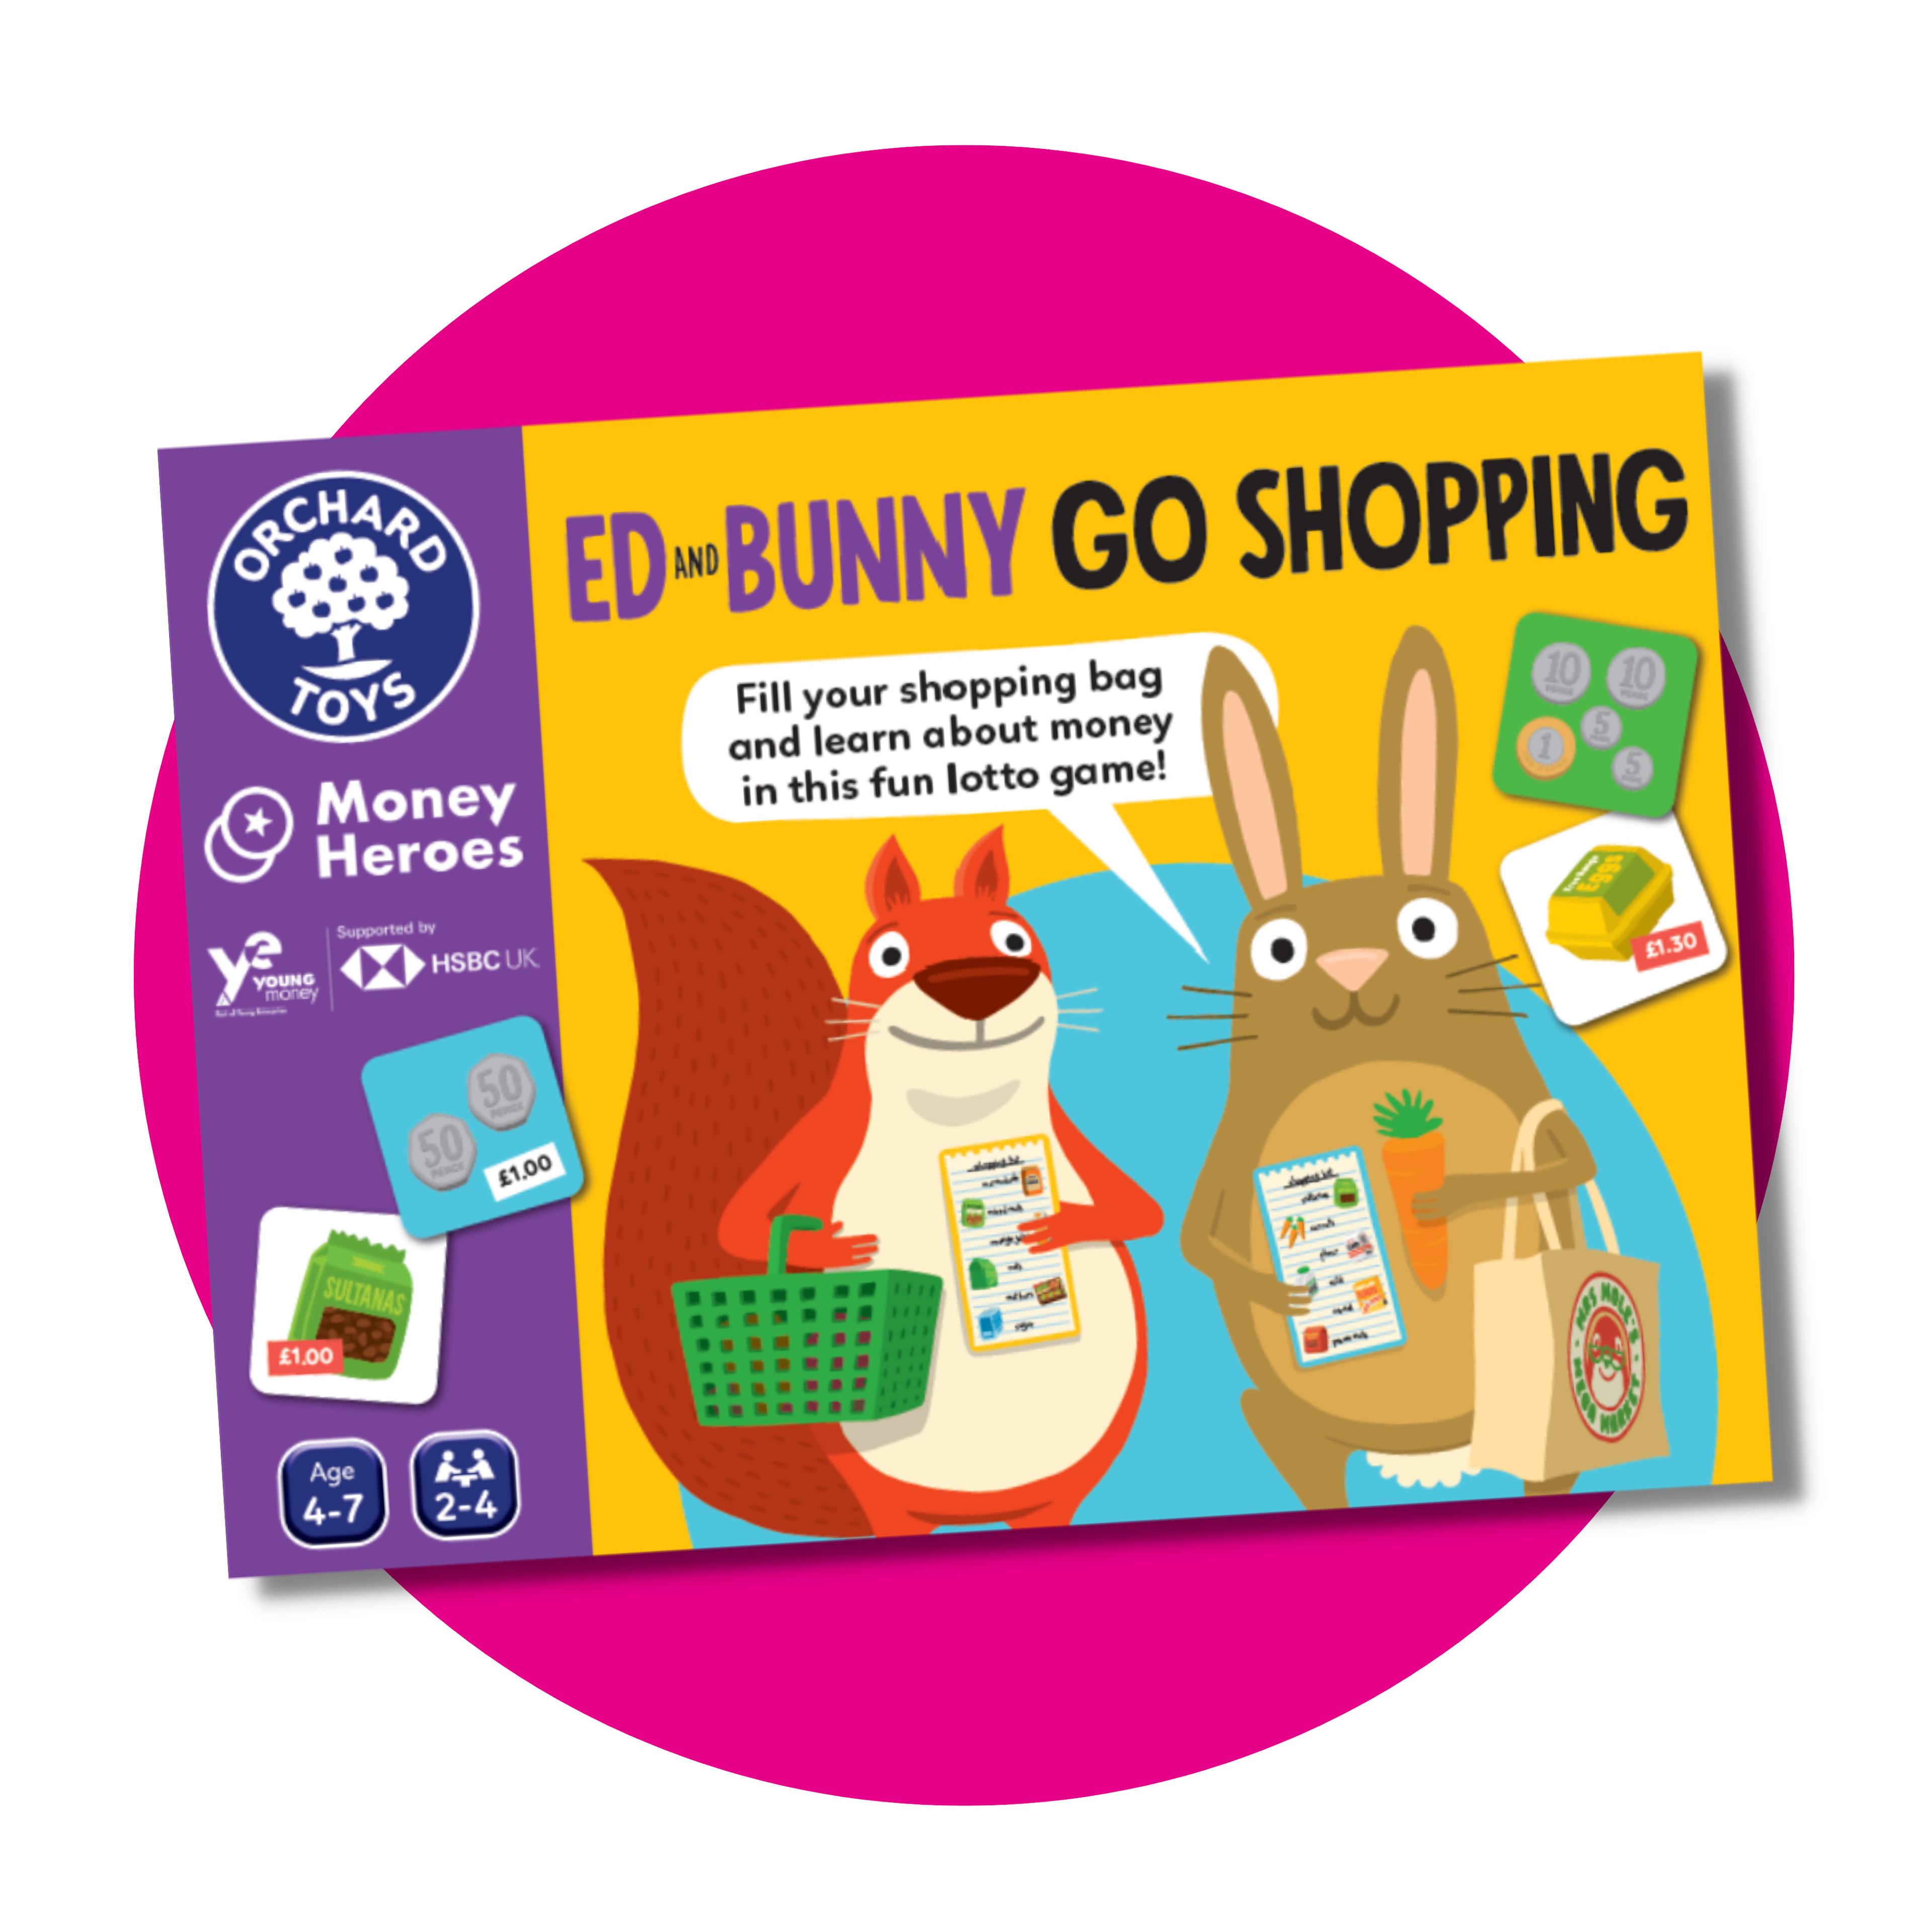 Illustration of board game box: Squirrel and bunny with shopping bags and baskets